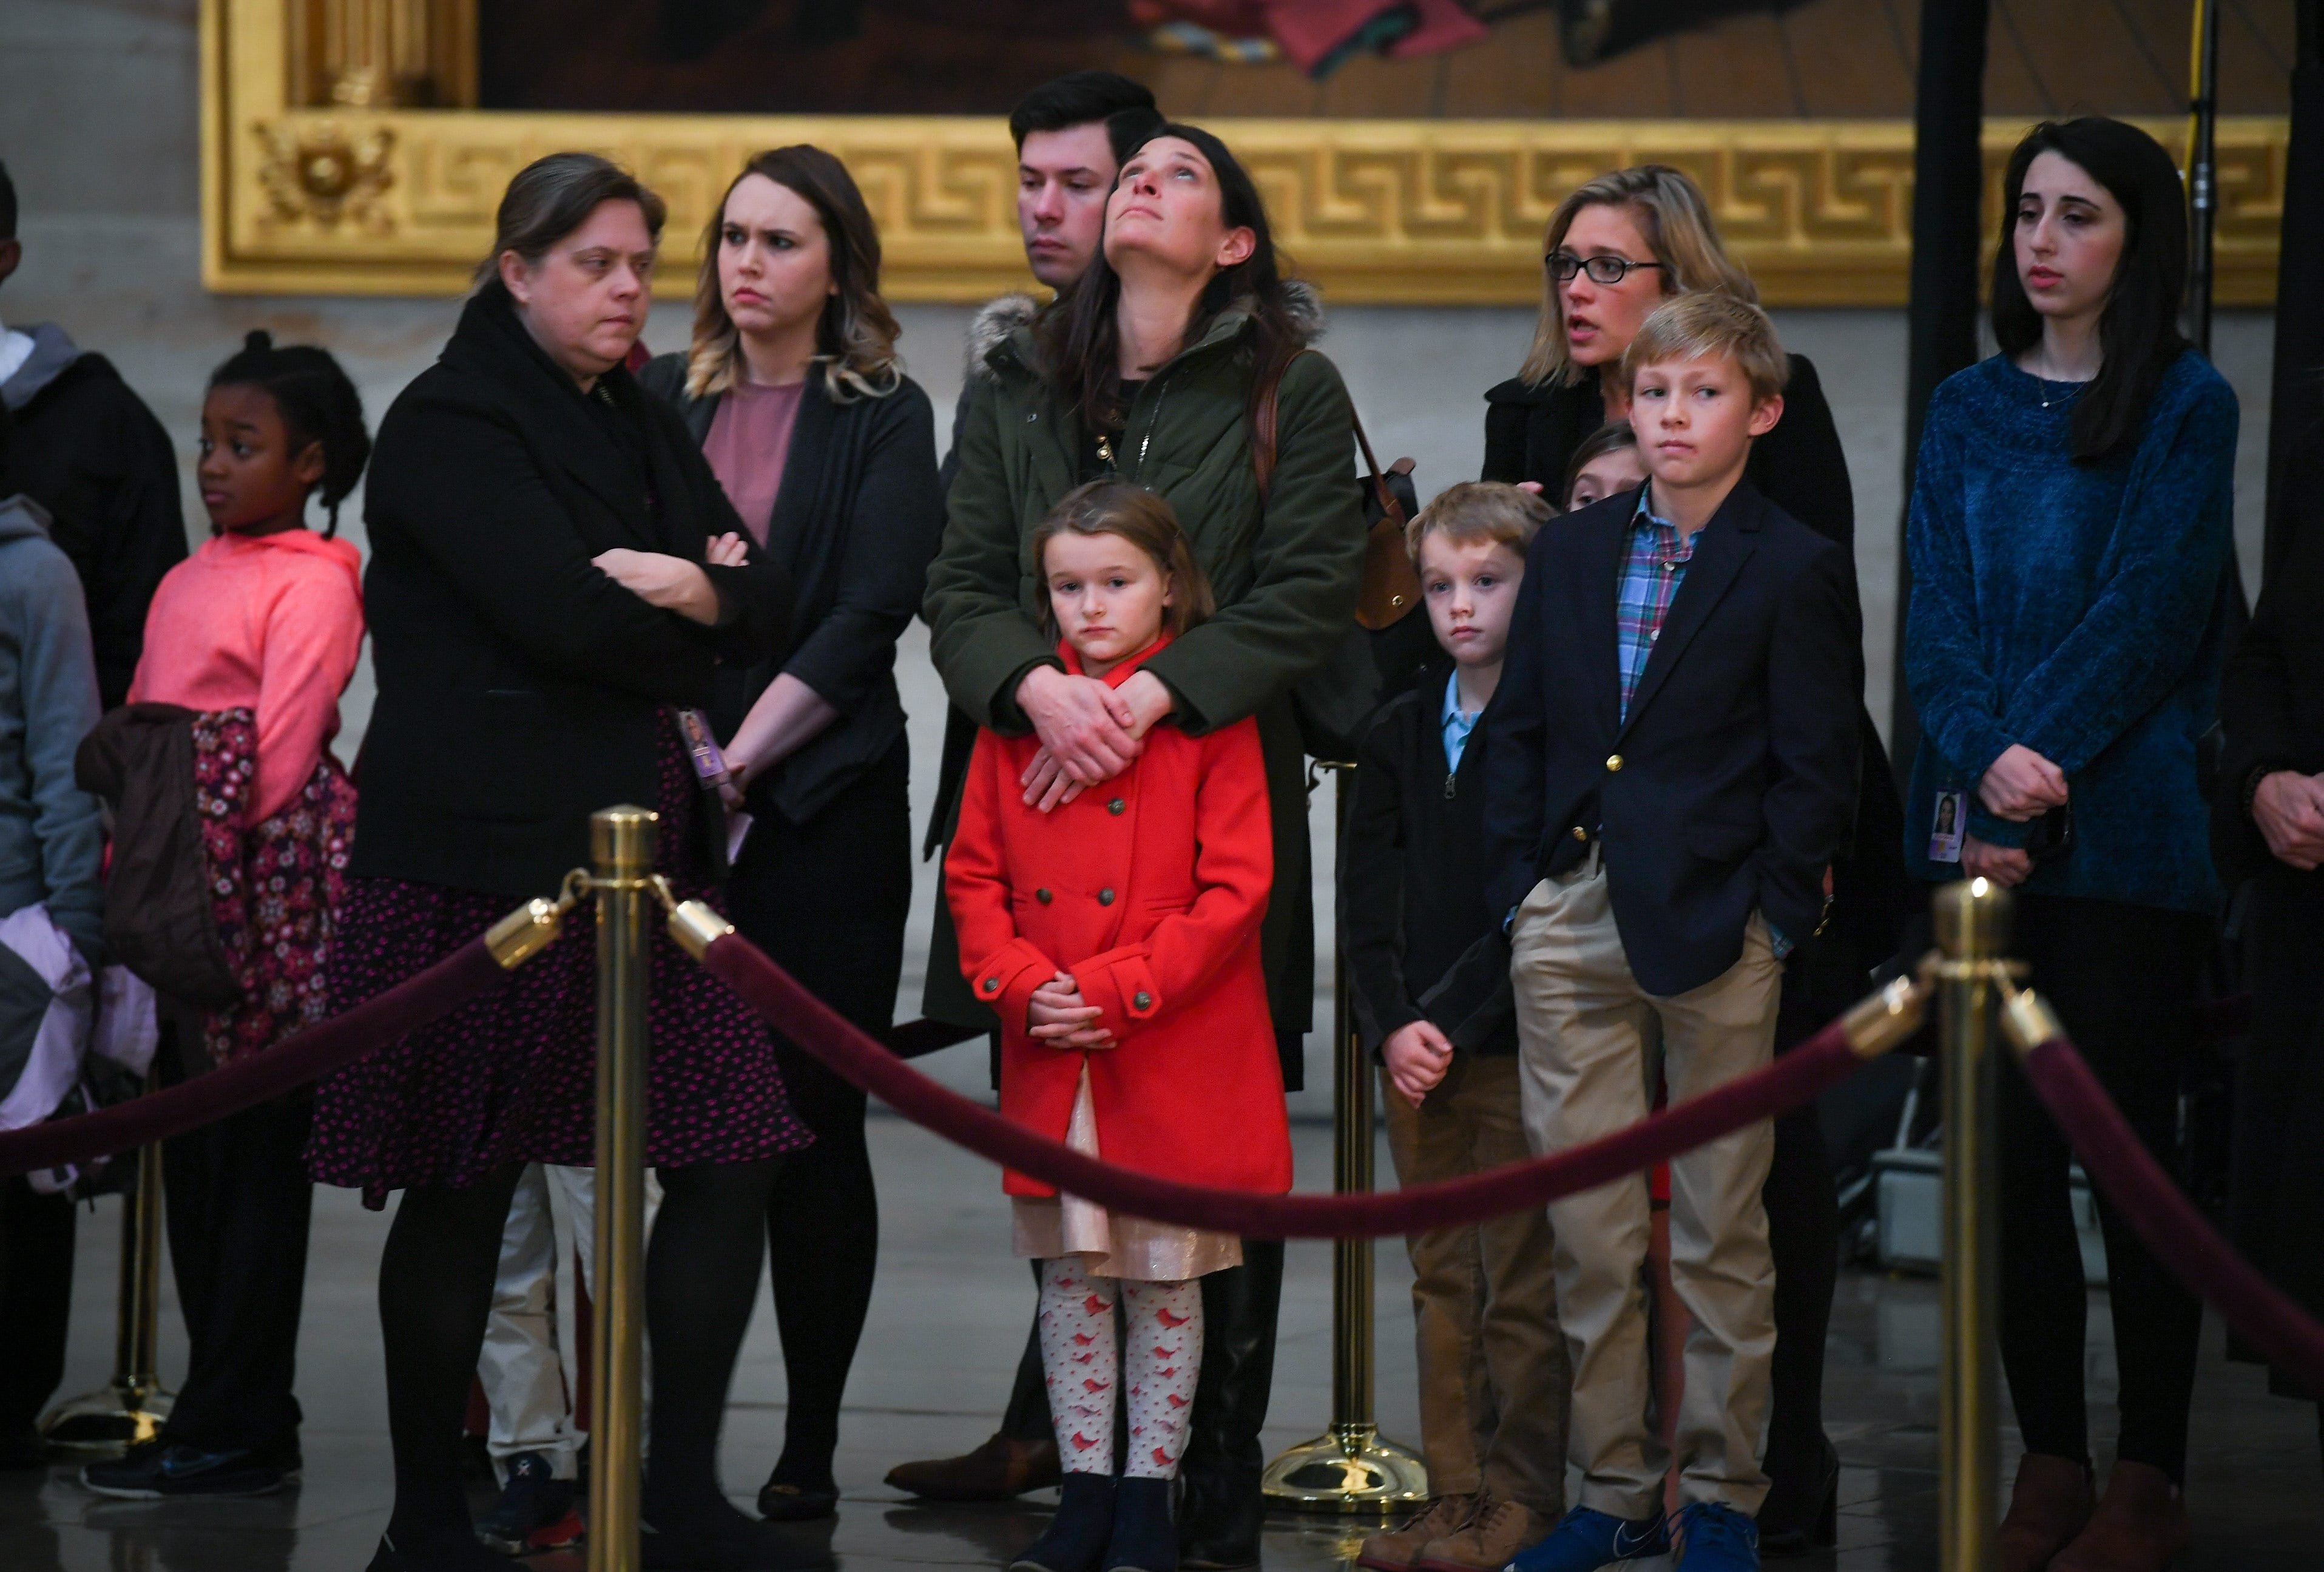 Visitors to the Capitol Rotunda pay respects to President George H.W. Bush, the 41 President and 32nd person to lie in state, Dec. 4, 2018. 